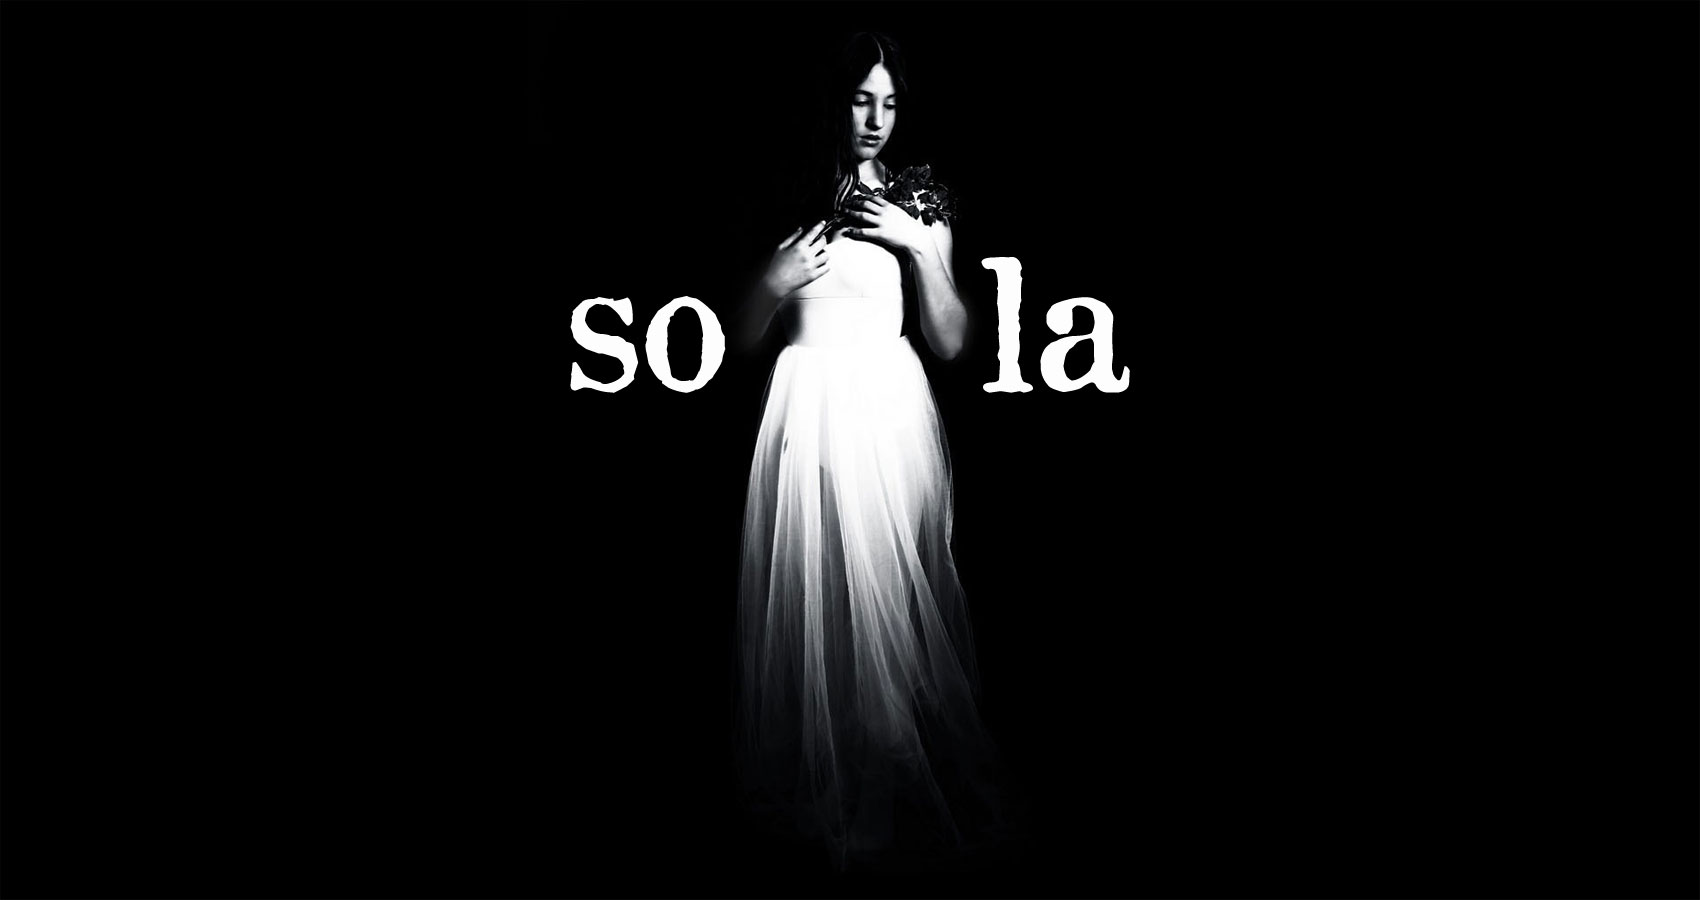 Sola by Natalia Aeschliman at Spillwords.com